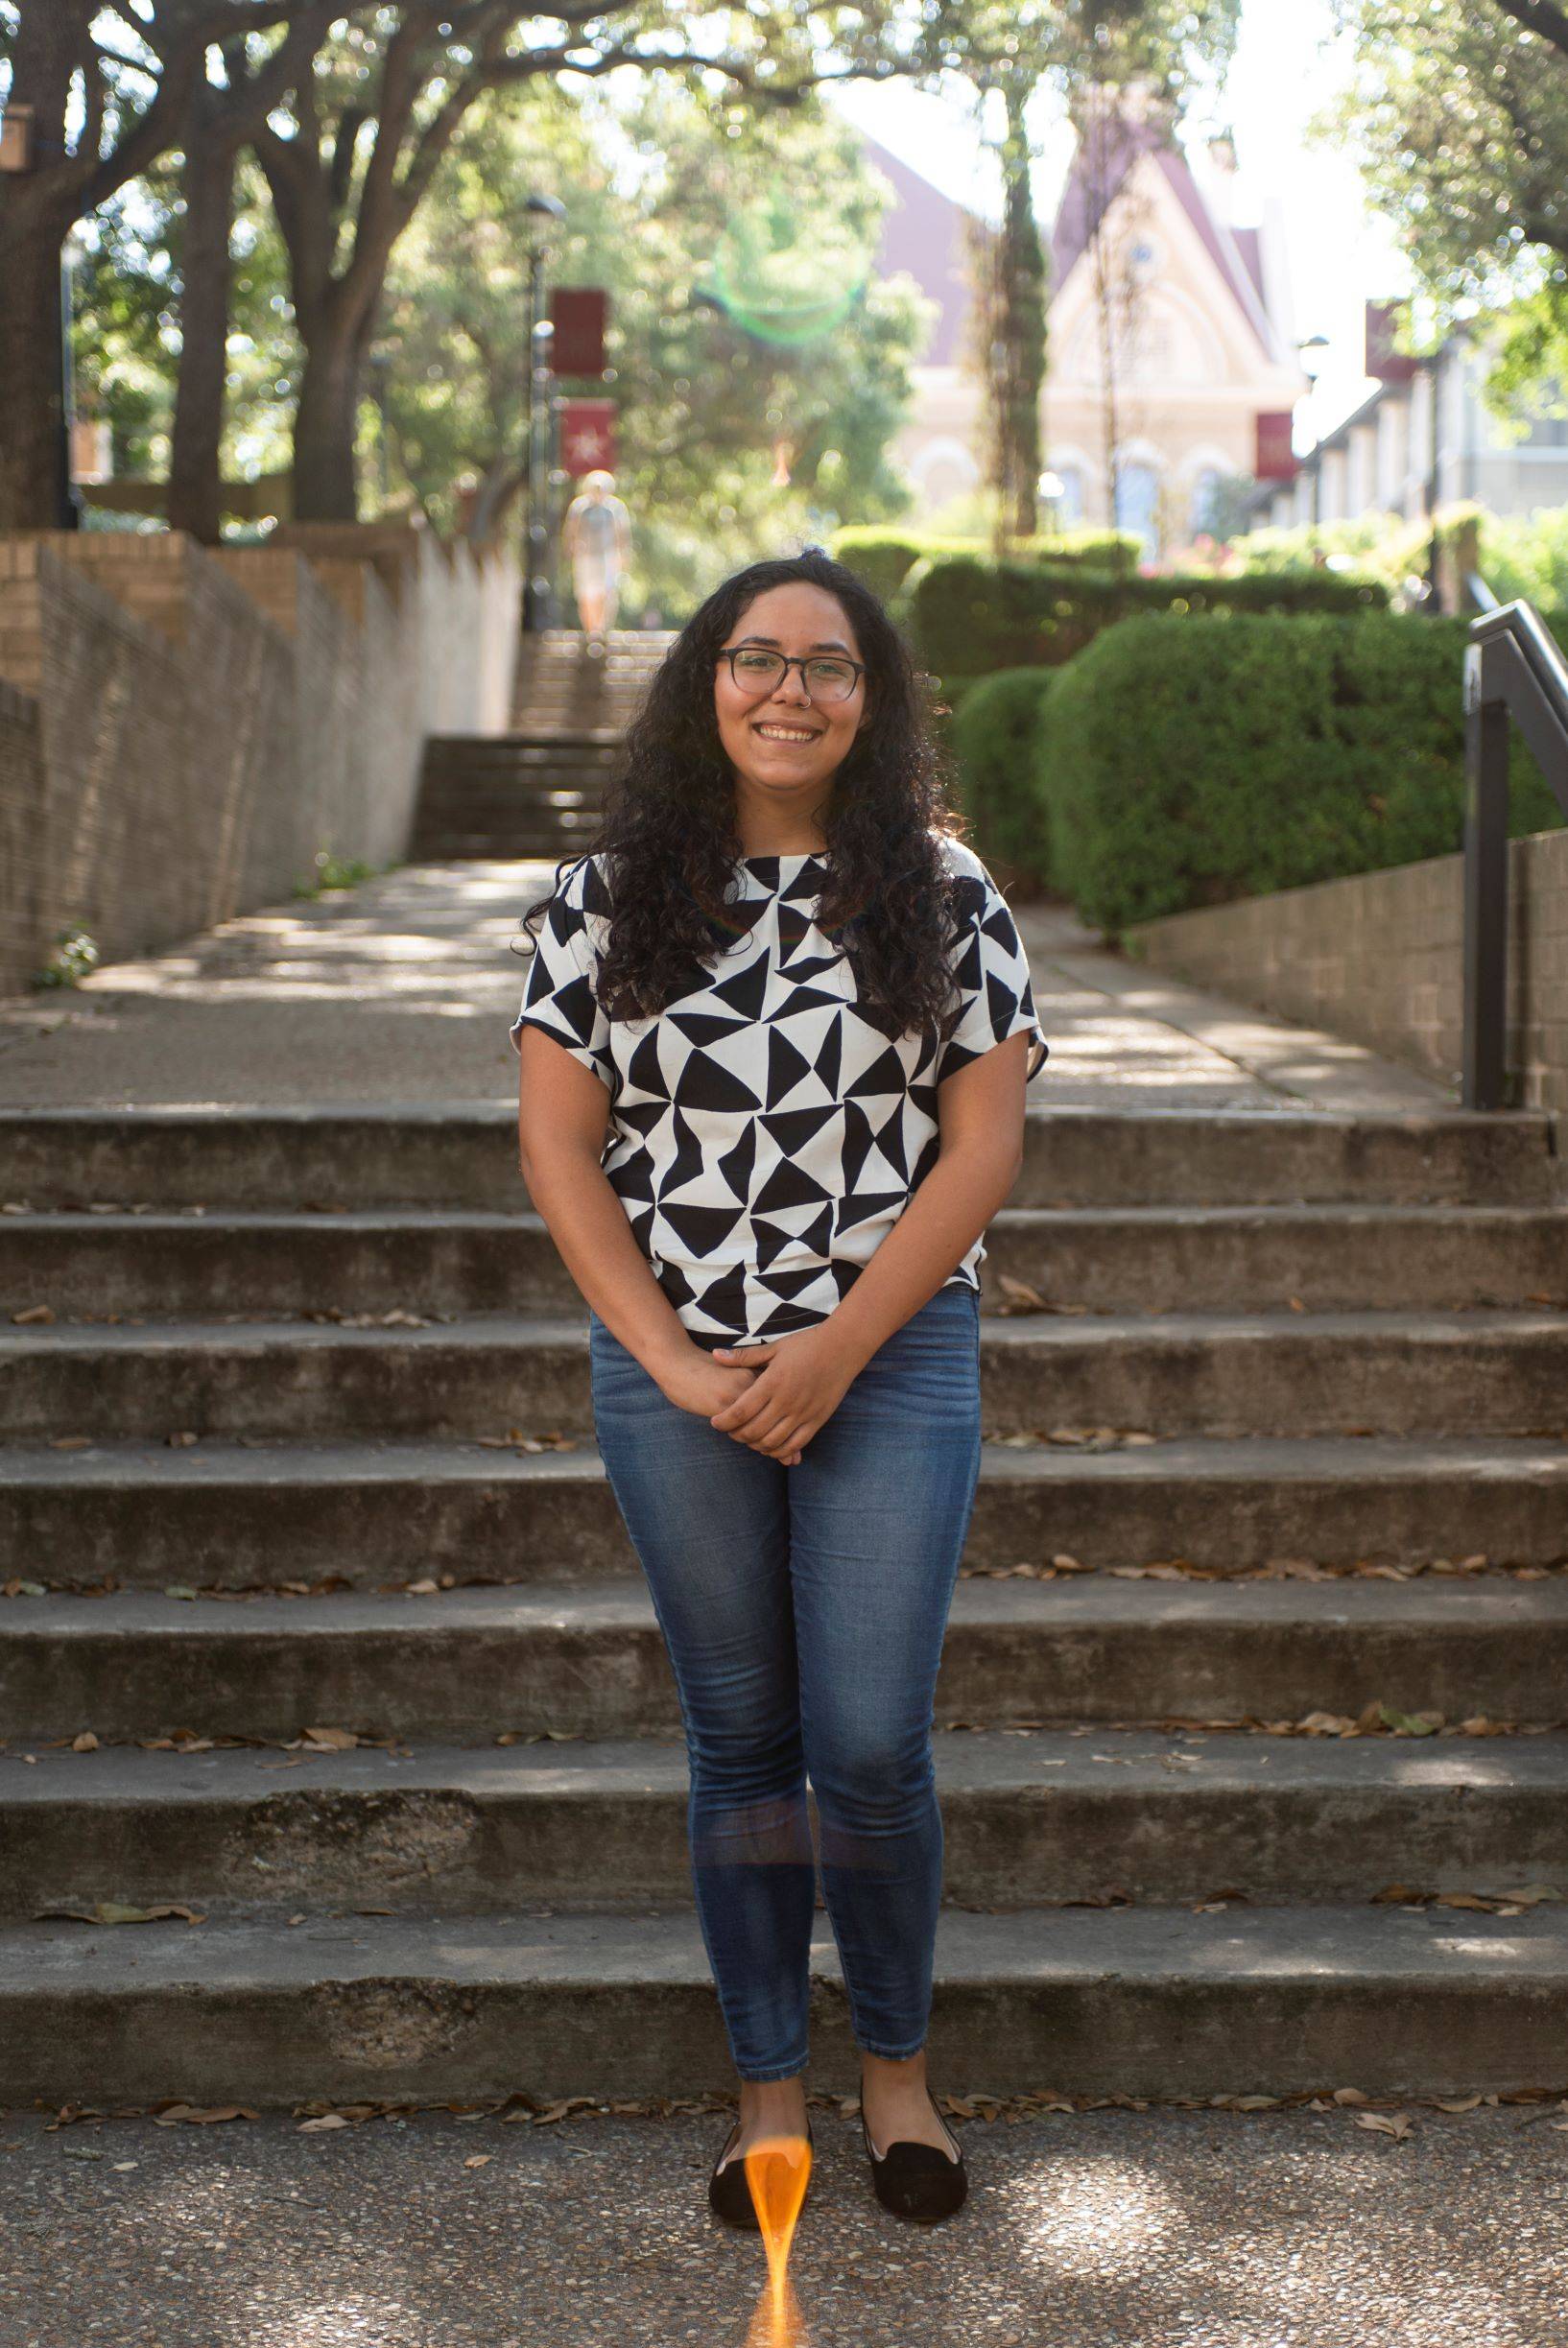 Elisia Paiz stands in front of the steps leading up to Old Main. She is smiling and holding her hands in front of herself.